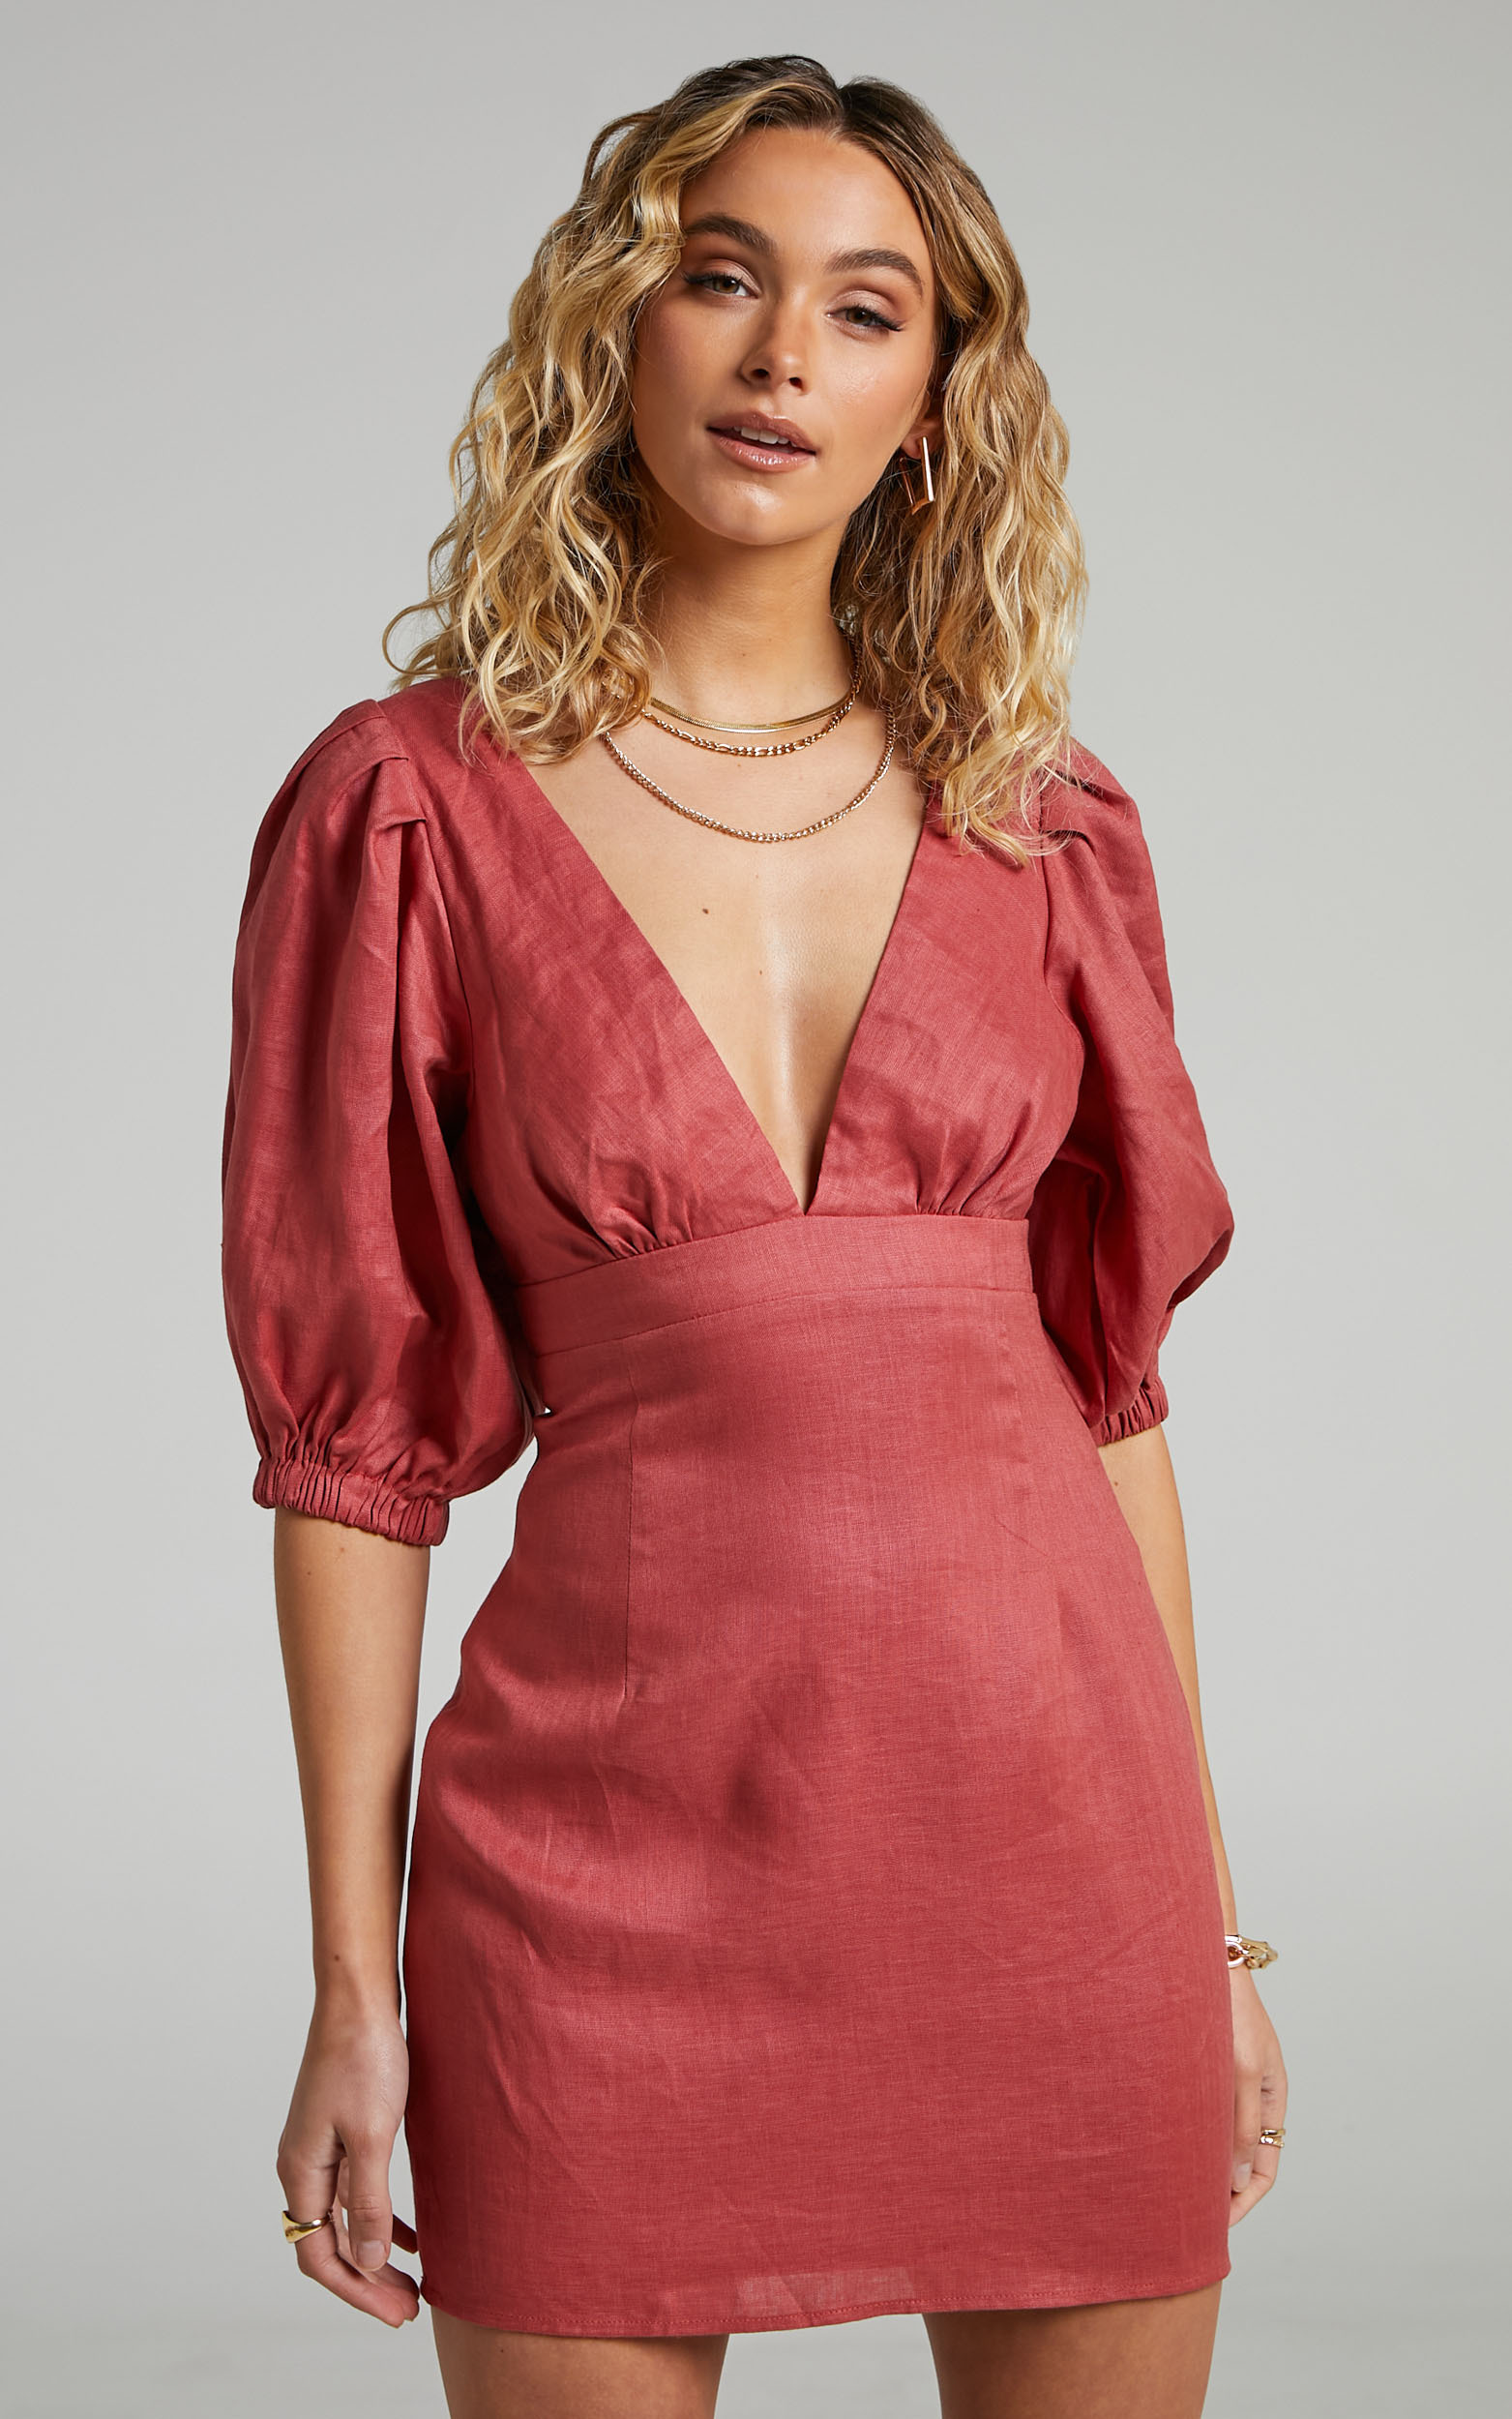 Amalie The Label - Mikaelle Linen Puff Sleeve Open Back Bodycon Mini Dress in Burnt Rose - 06, PNK1, hi-res image number null